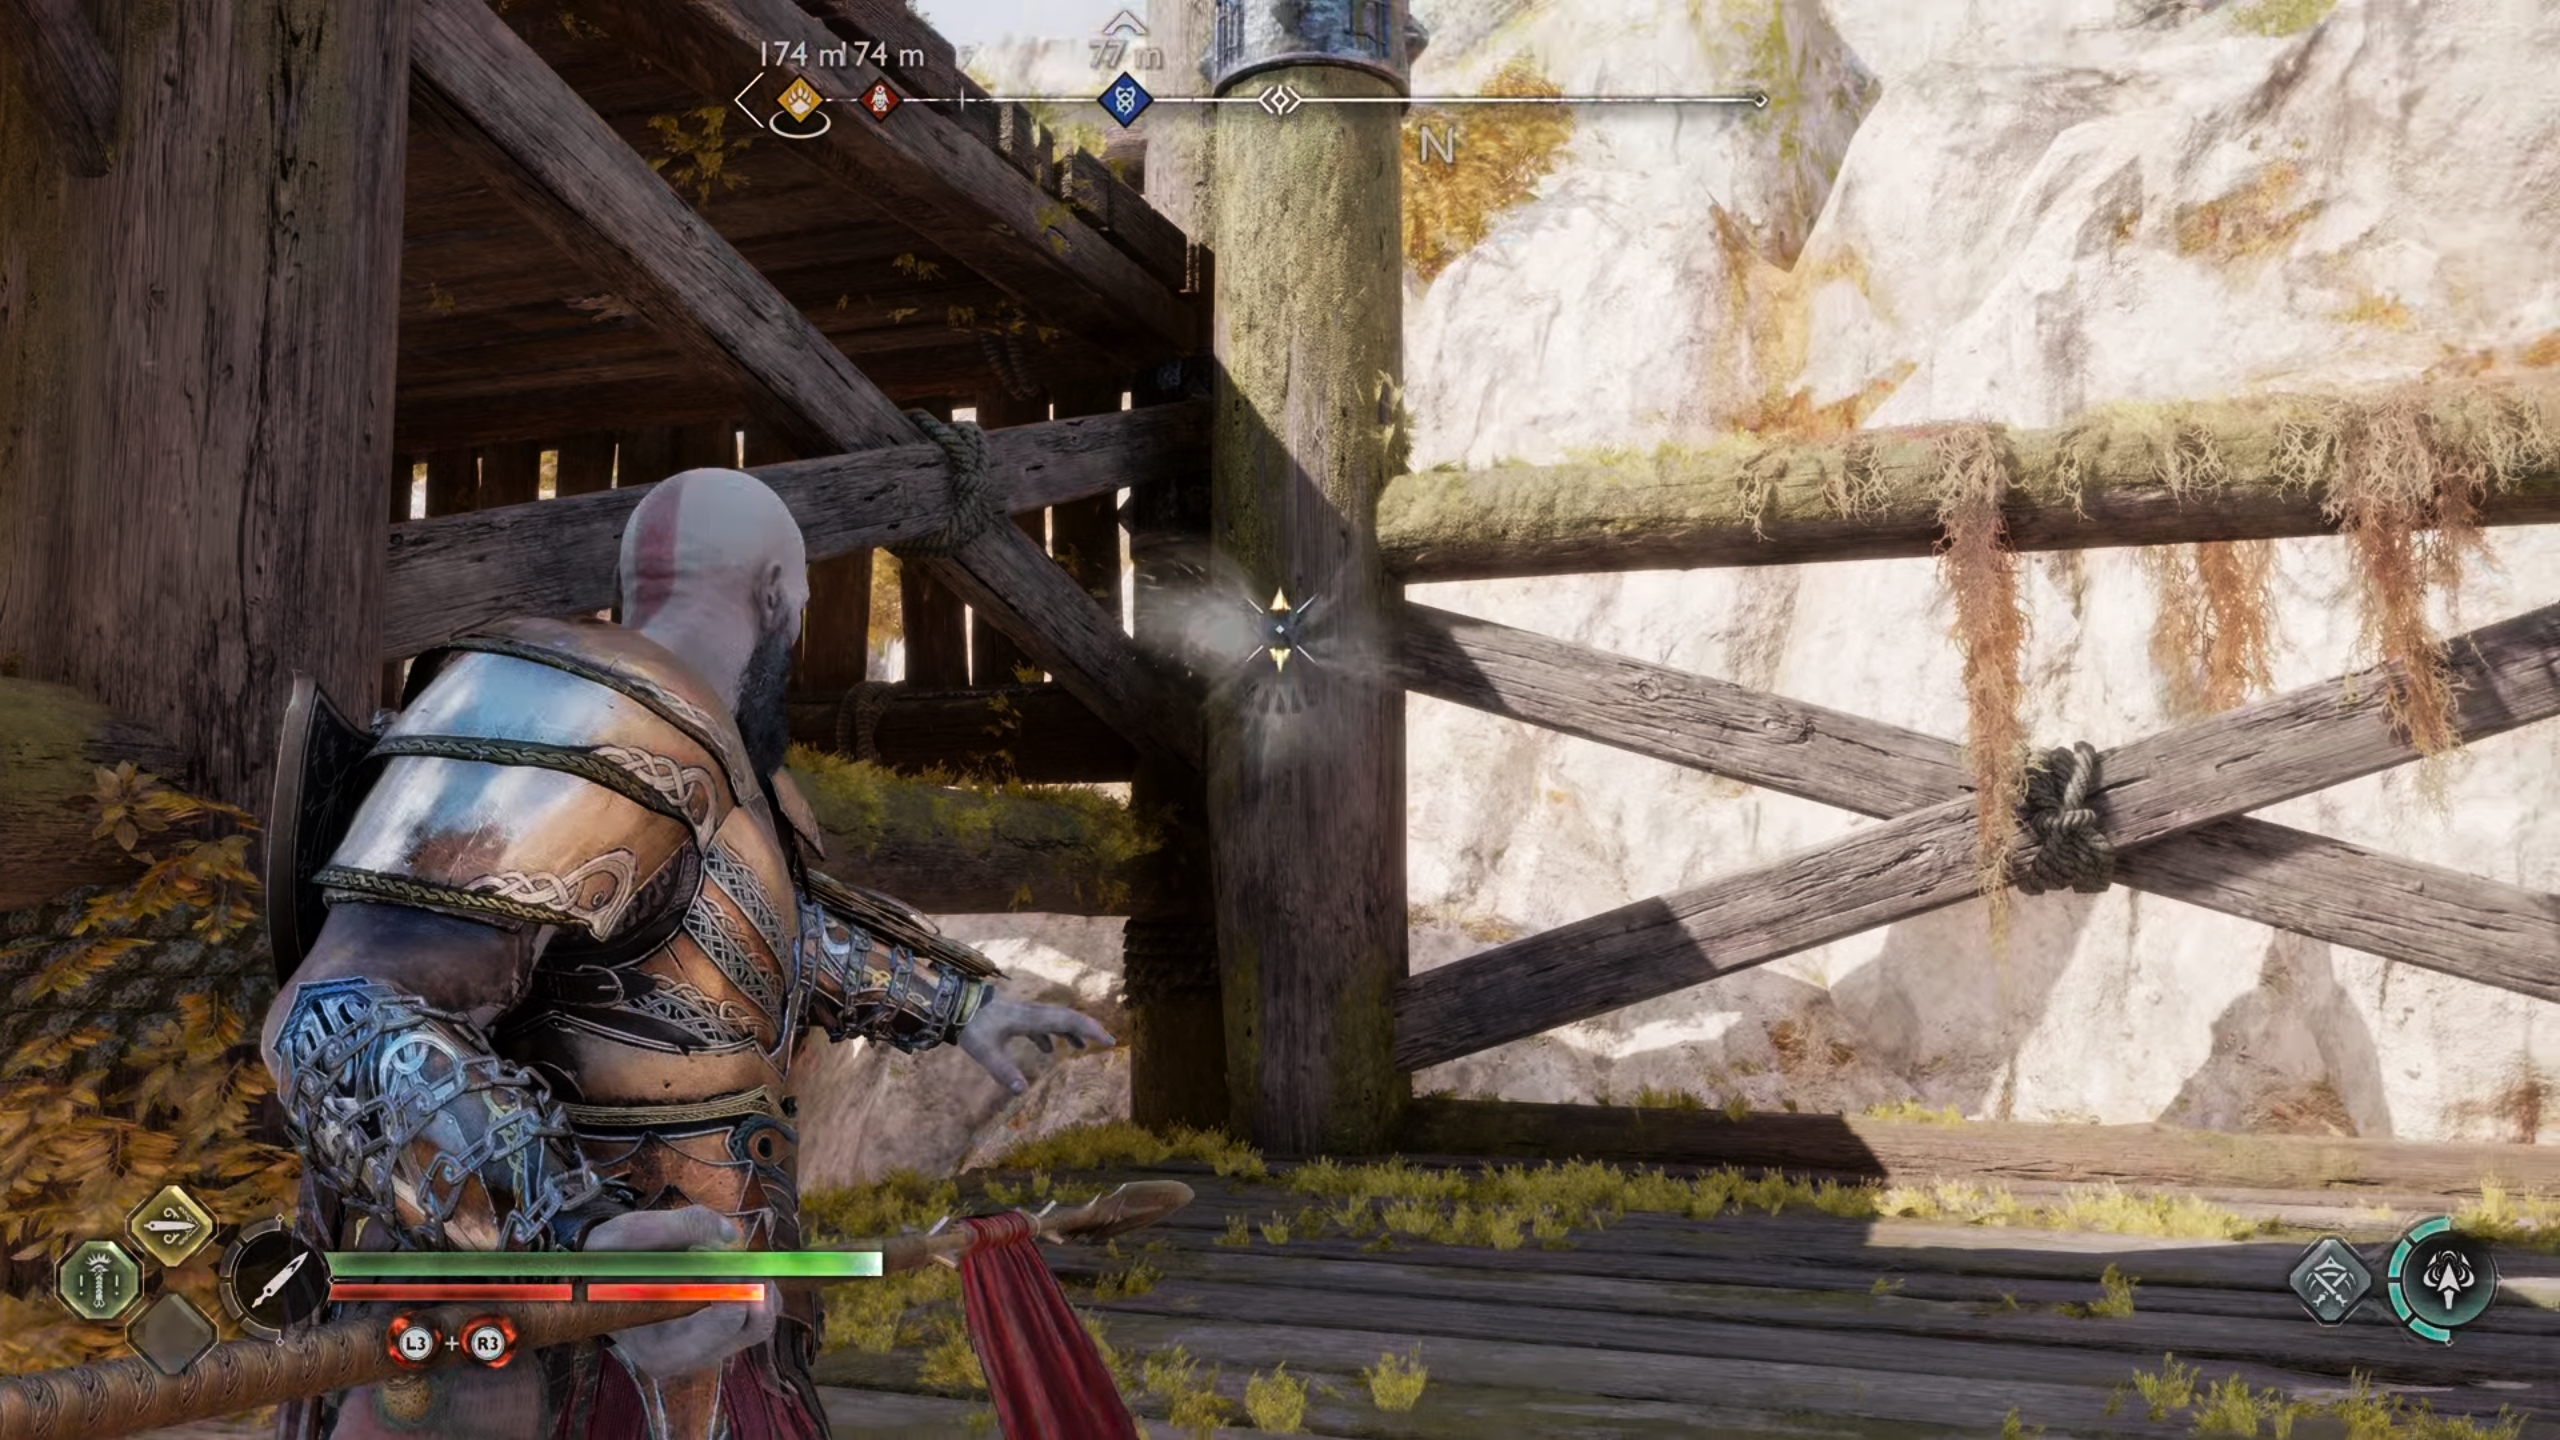 Throw the spear at this point to gain access to the hidden area above.